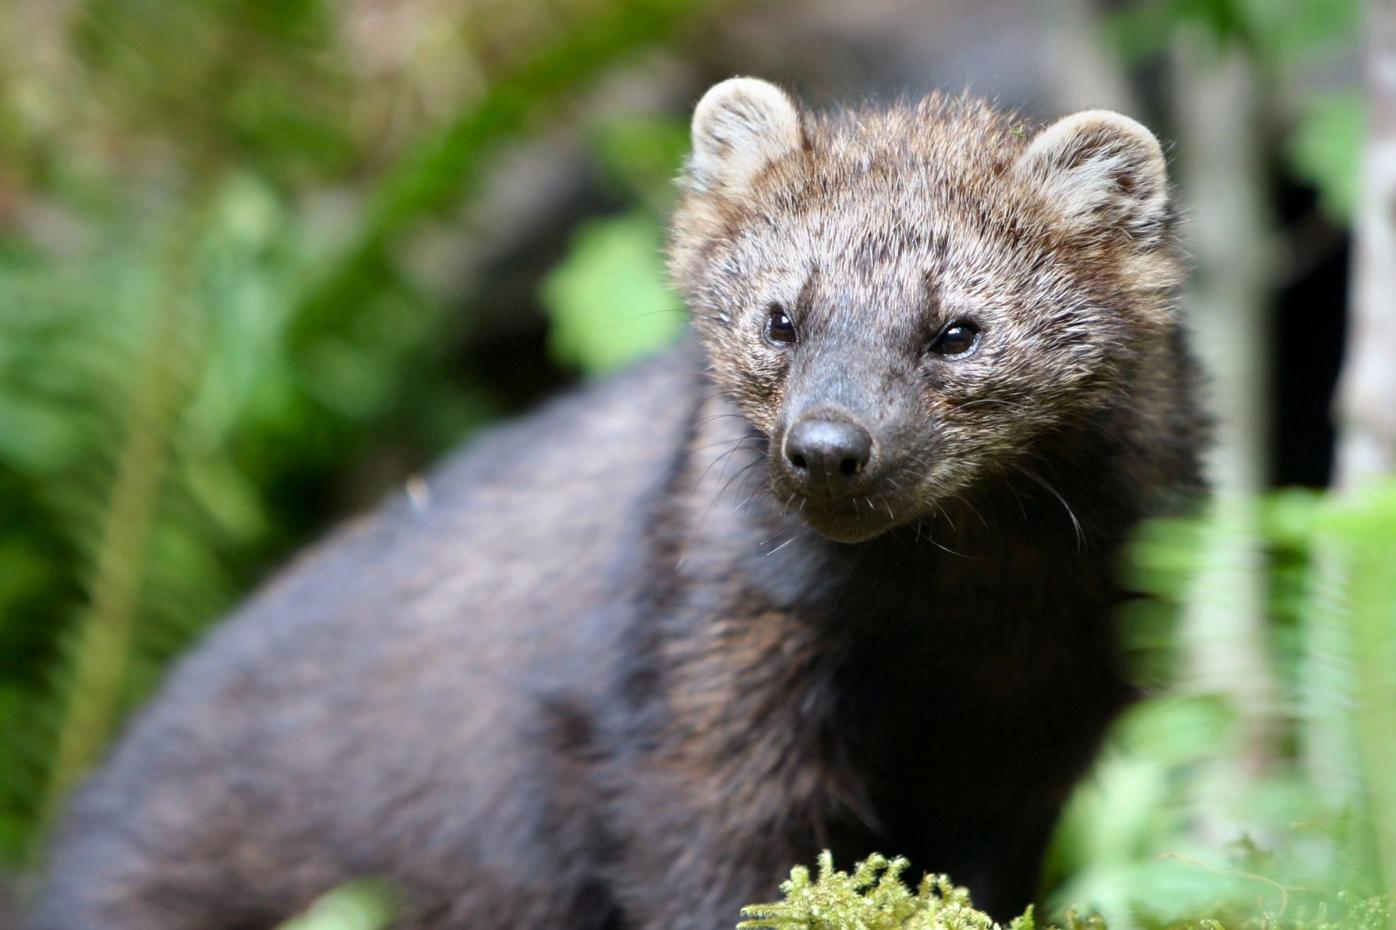 Weasel-like fishers find home in Chelan County | Local News |  